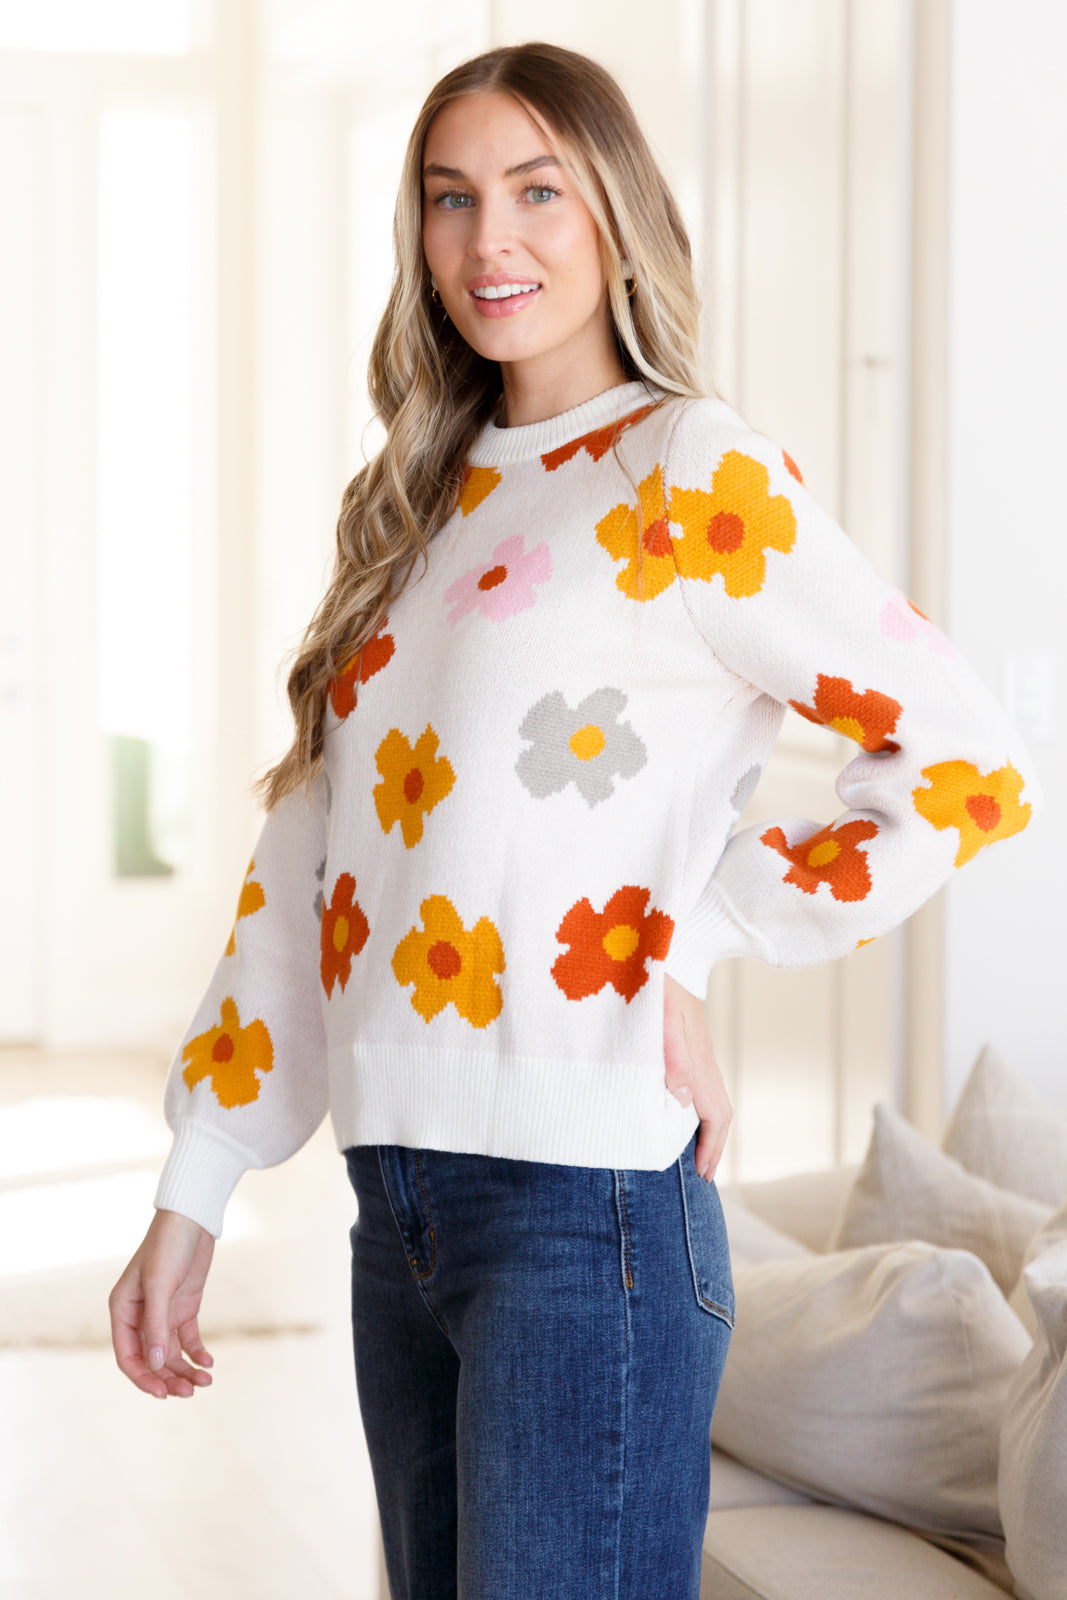 Falling Flowers Floral Sweater - Mulberry Skies